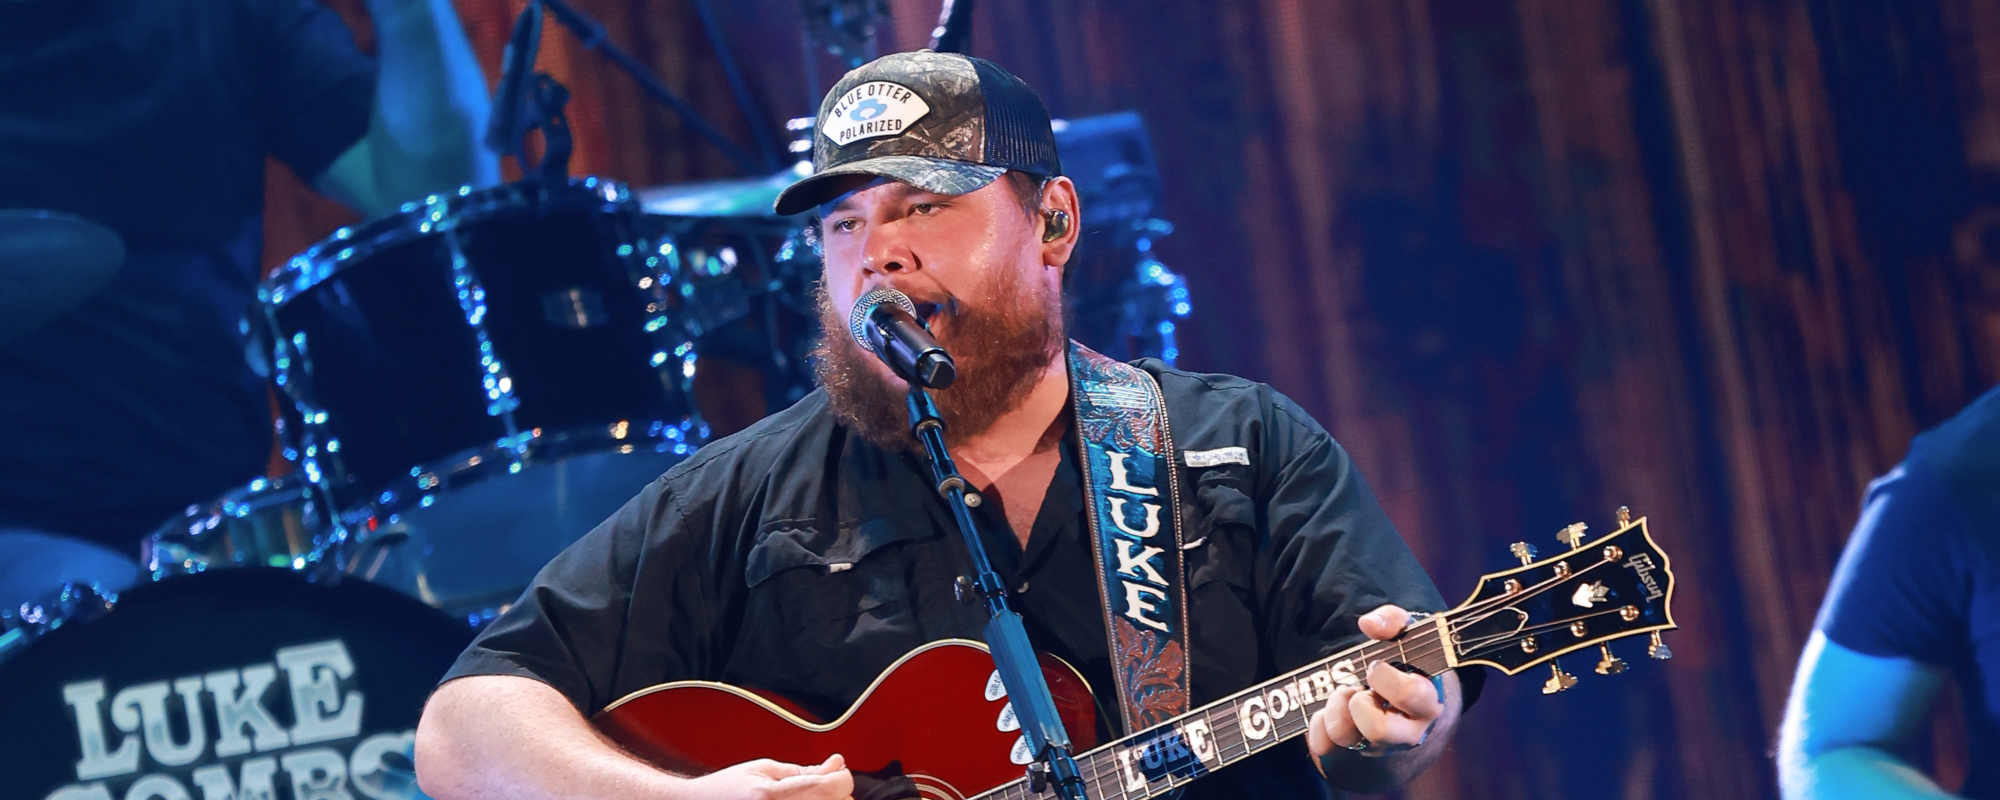 Luke Combs, Opry Entertainment Announce New Entertainment Space in Downtown Nashville